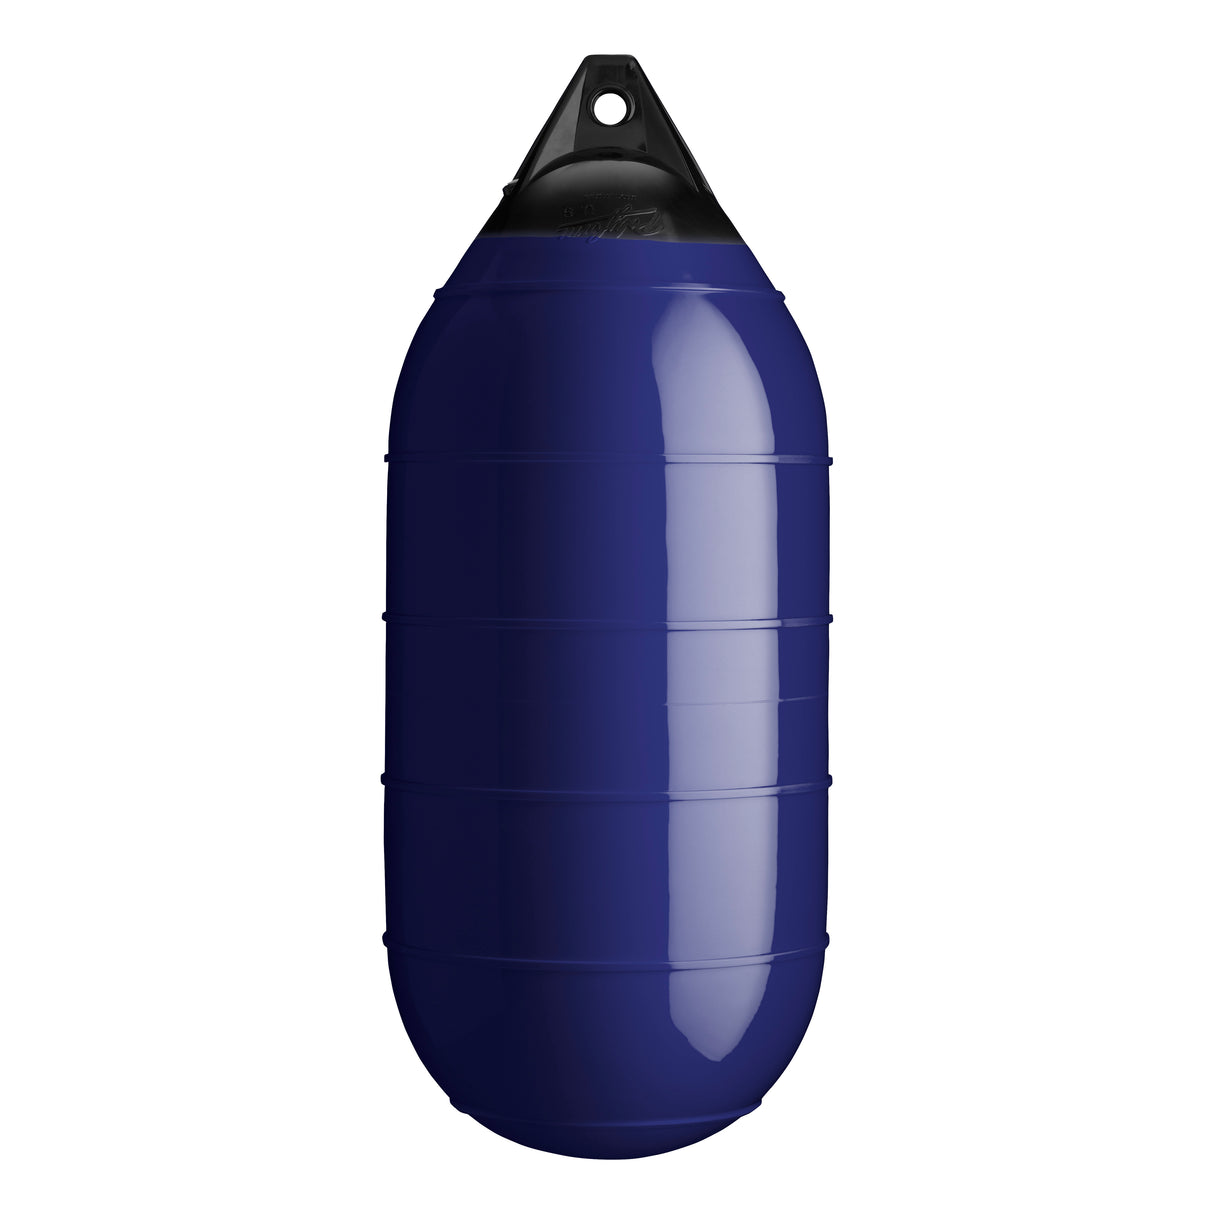 Navy Blue low drag buoy with Black-Top, Polyform LD-4 